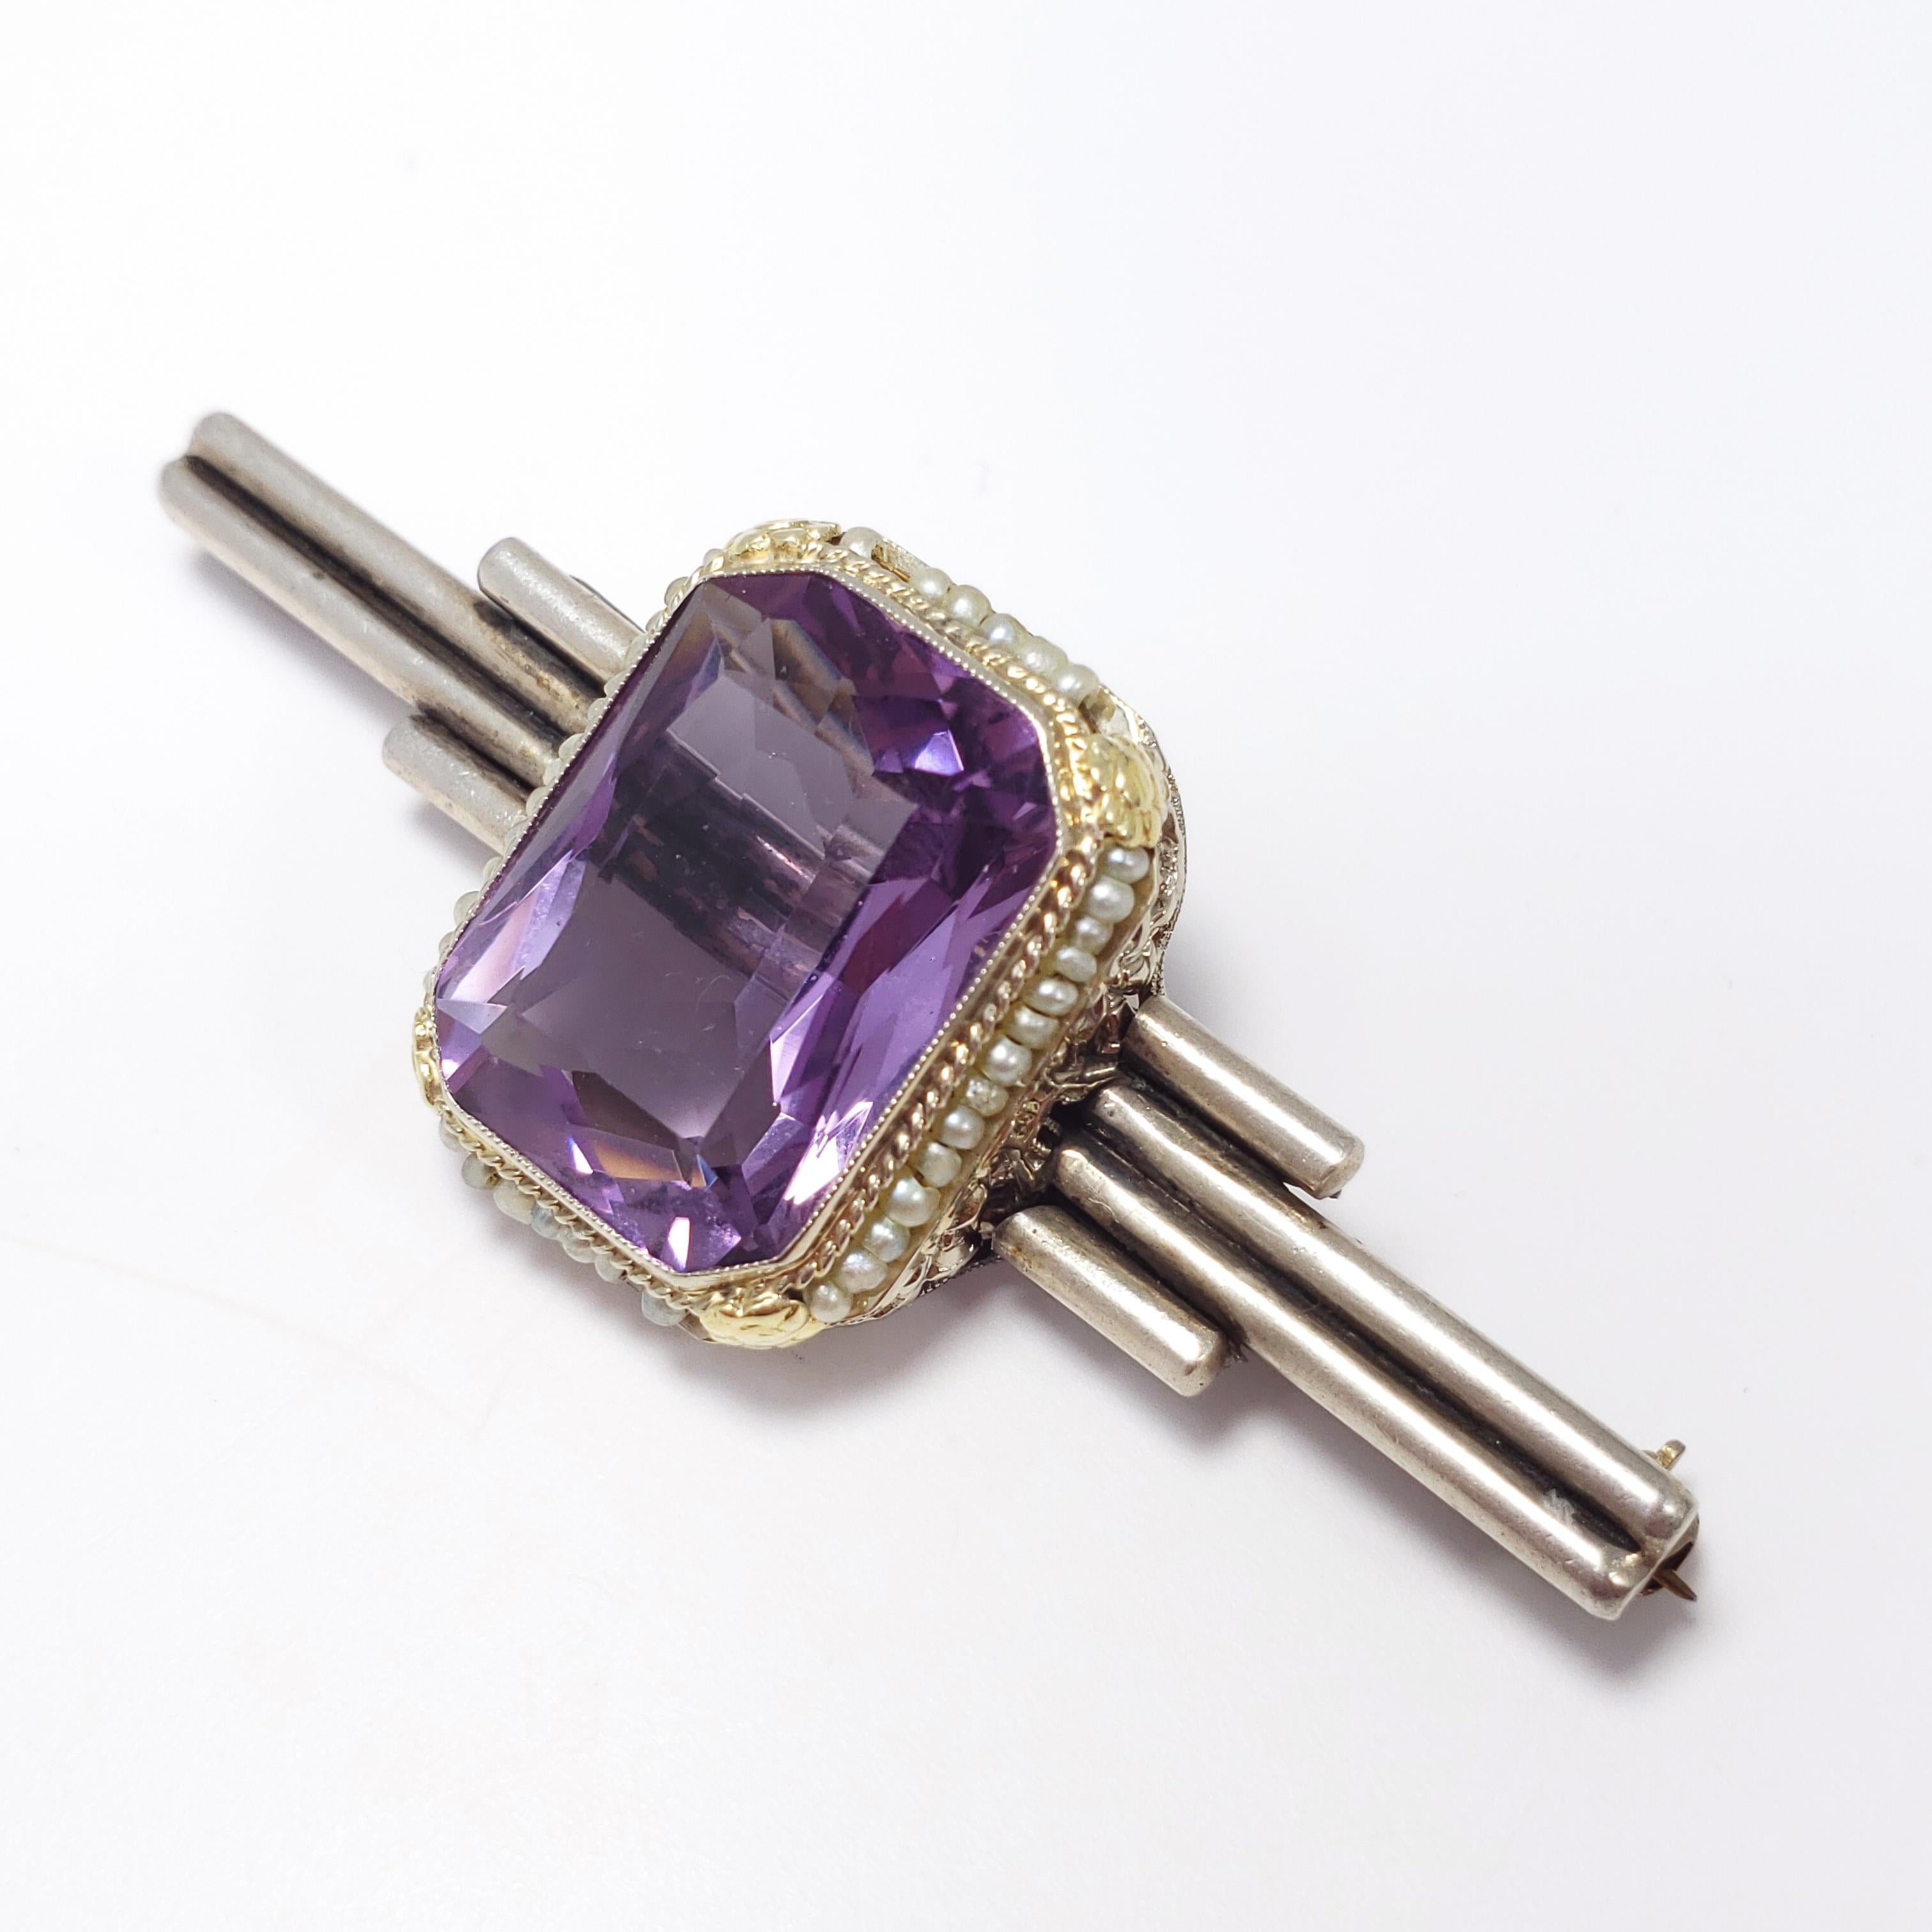 This Victorian art-deco brooch features a 1.8 x 1.4 cm centerpiece faceted, open back amethyst gemstone, surrounded by real seeded pearls and set in a gold-plated sterling silver filigree and floral motif bezel. The bezel sits on an art-deco